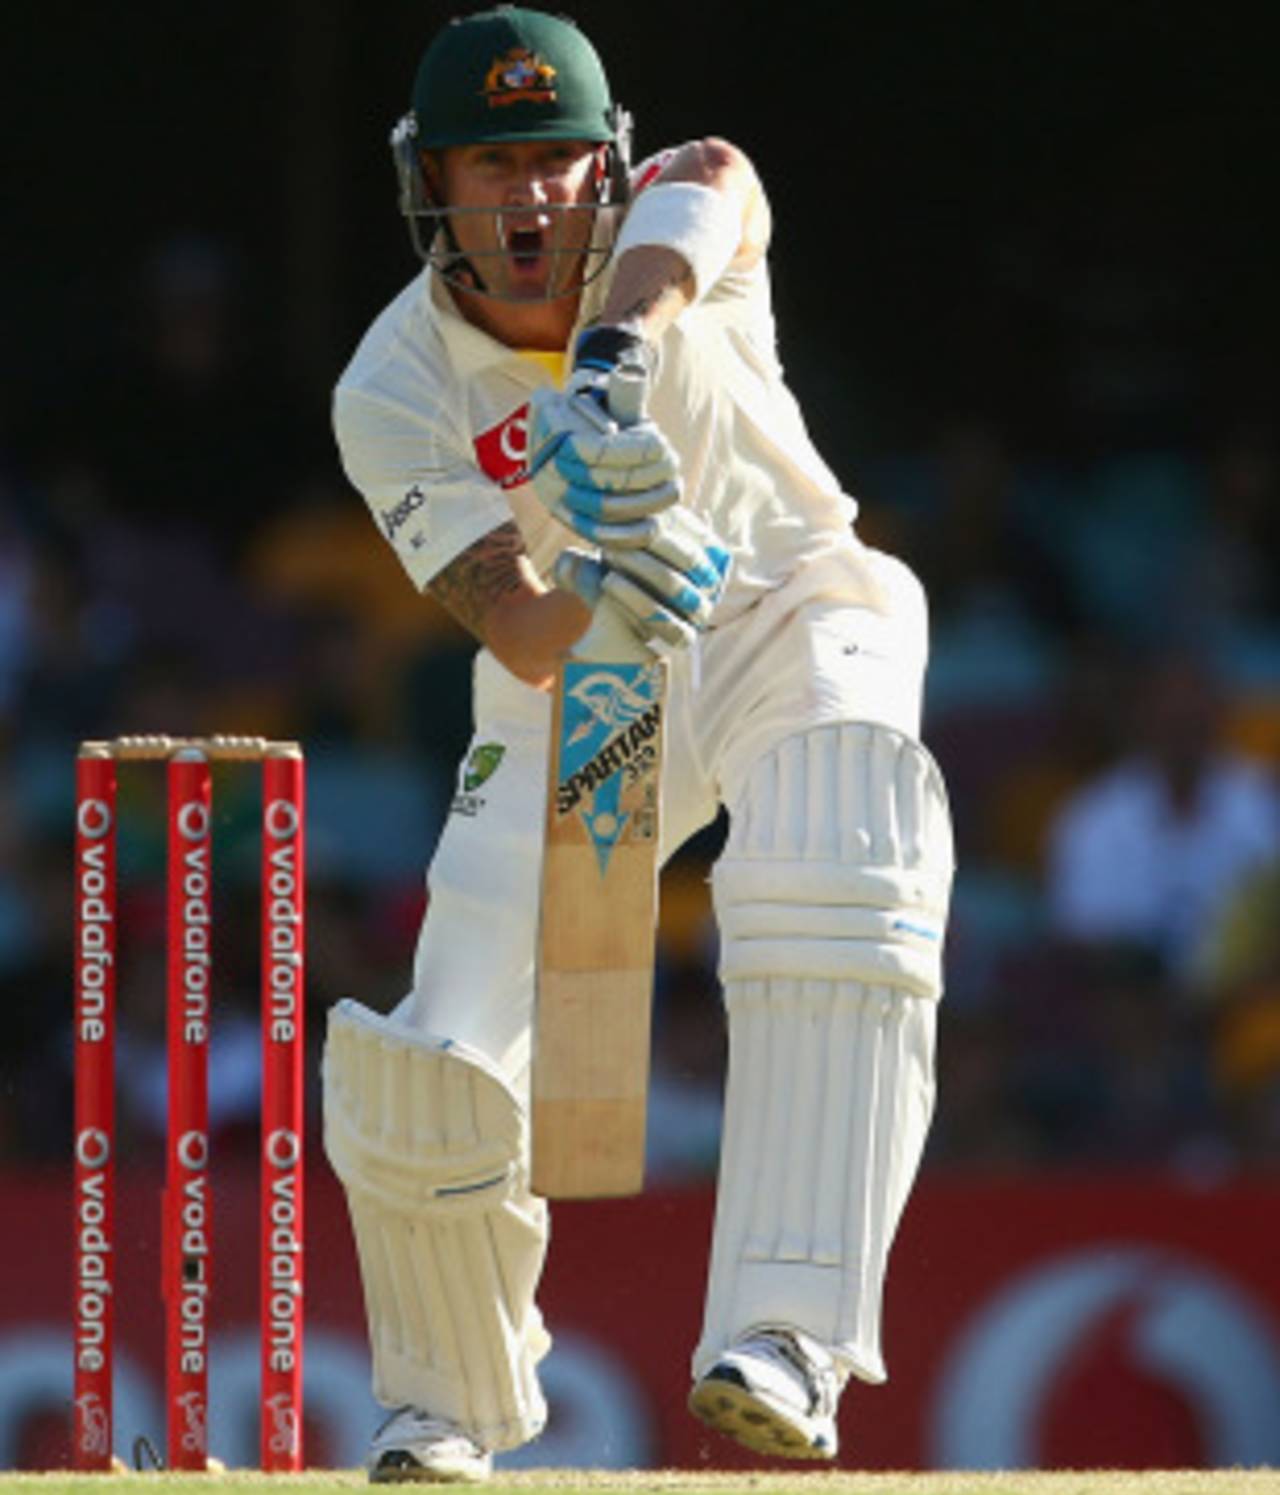 Michael Clarke calls out loud after playing a defensive shot, Australia v South Africa, 1st Test, 3rd day, Brisbane, November 11, 2012